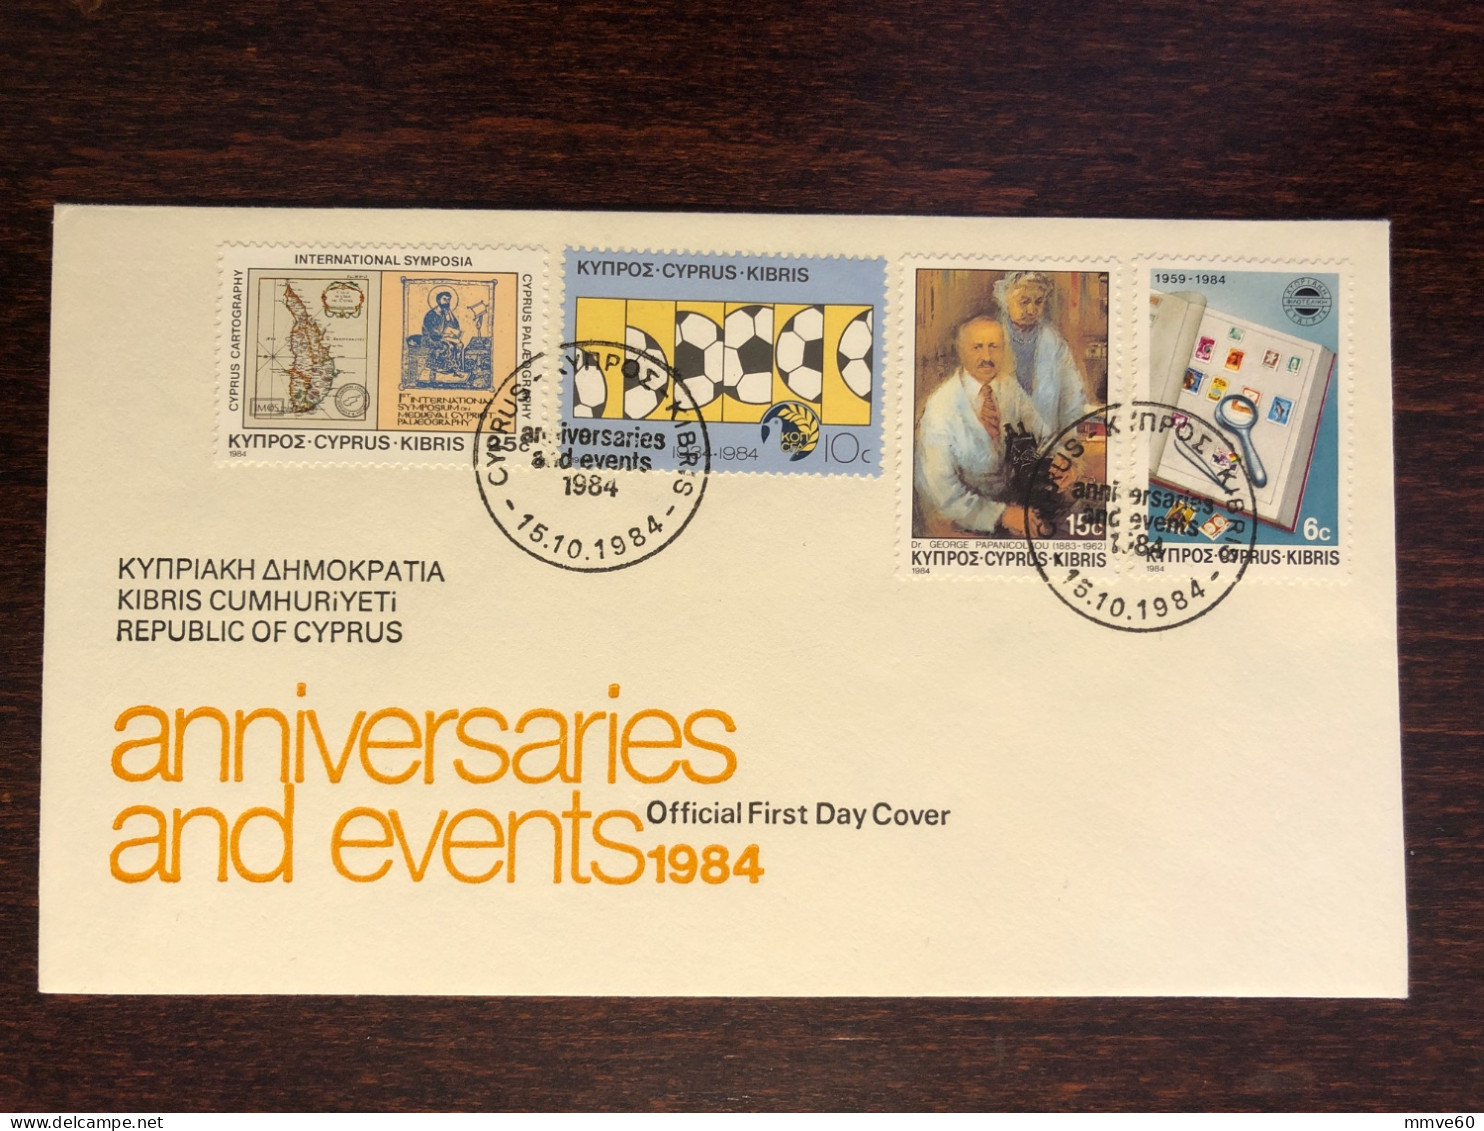 CYPRUS FDC COVER 1984 YEAR PAPANICOLAU ONCOLOGY CANCER HEALTH MEDICINE STAMPS - Briefe U. Dokumente